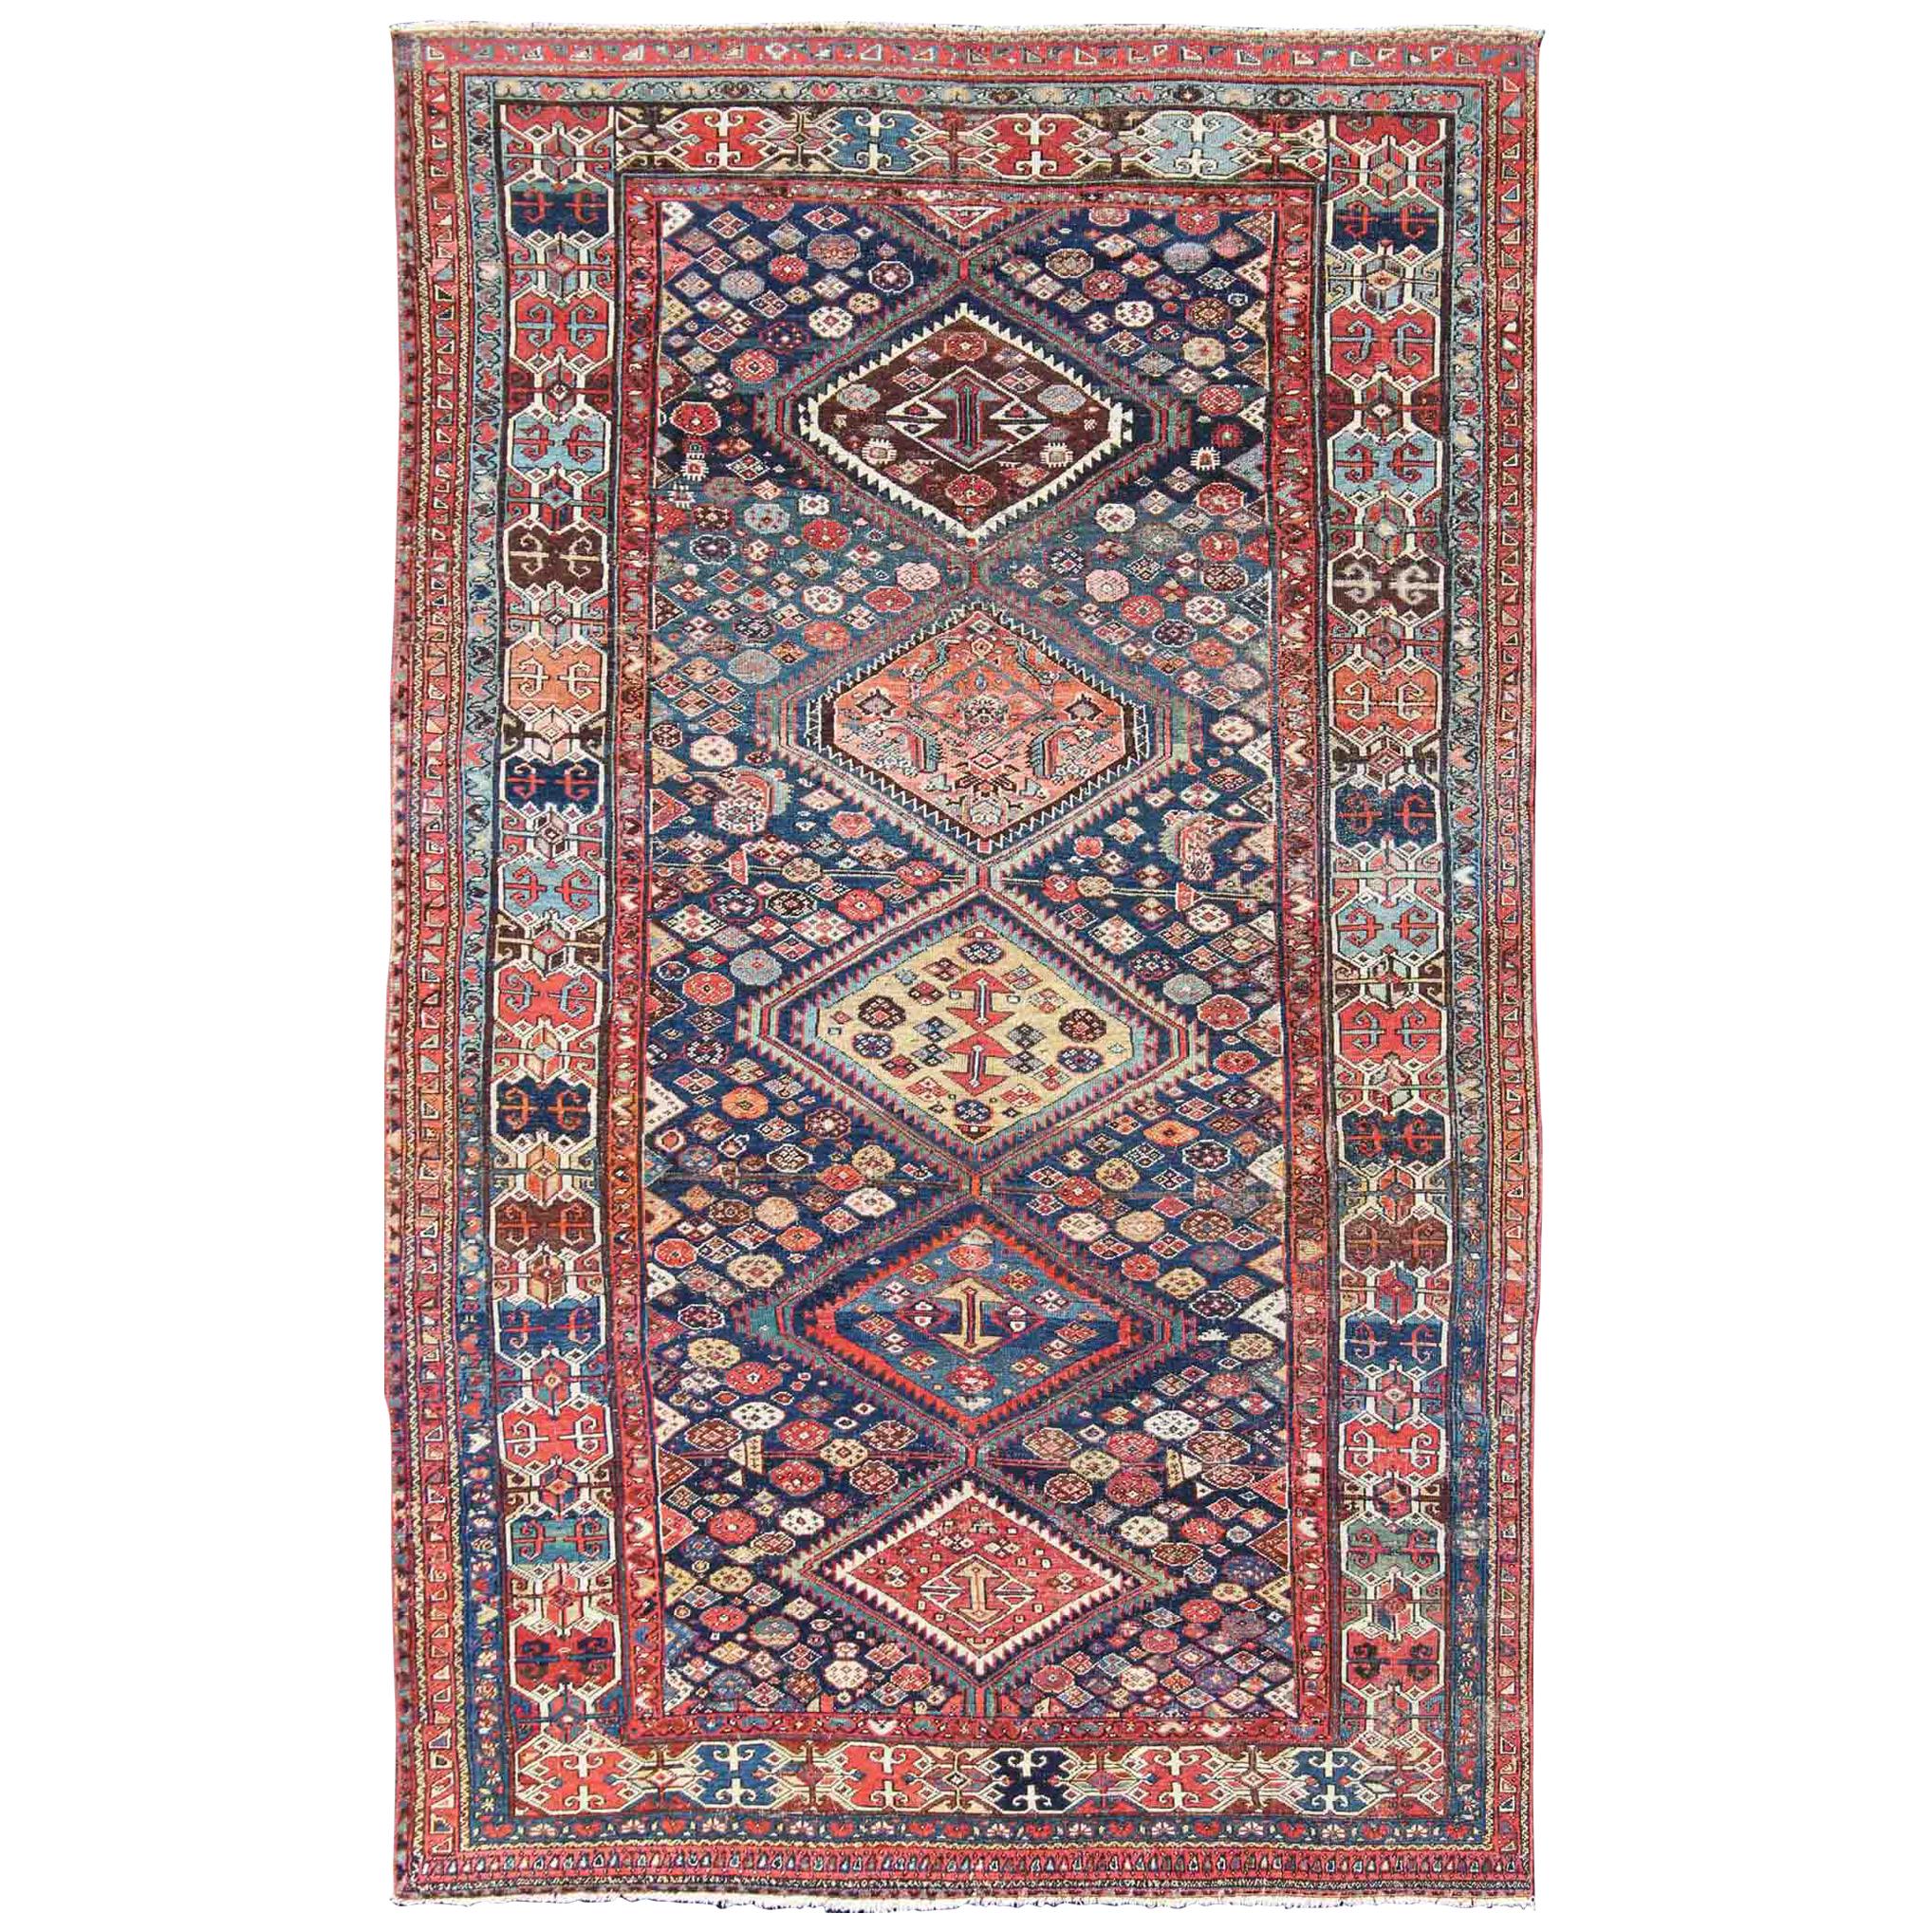 Antique Persian Bibikabad Rug with Diamond Medallions in Blue Background